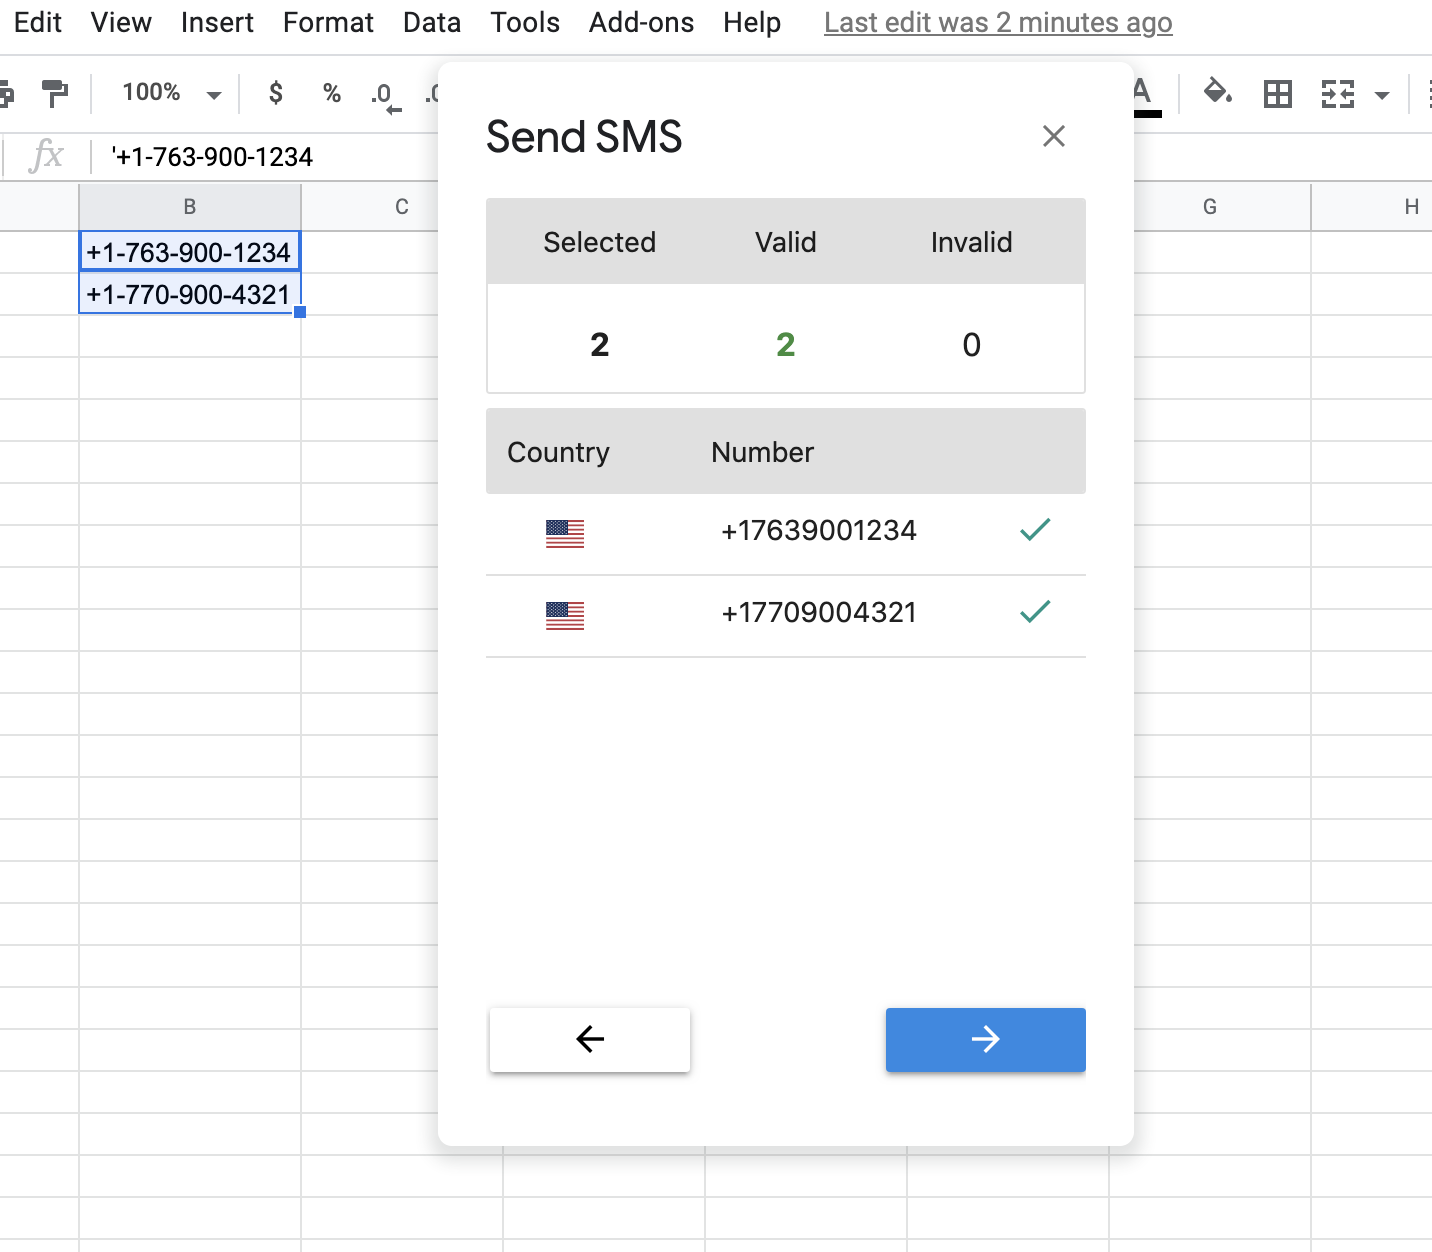 Send SMS - Selected phones